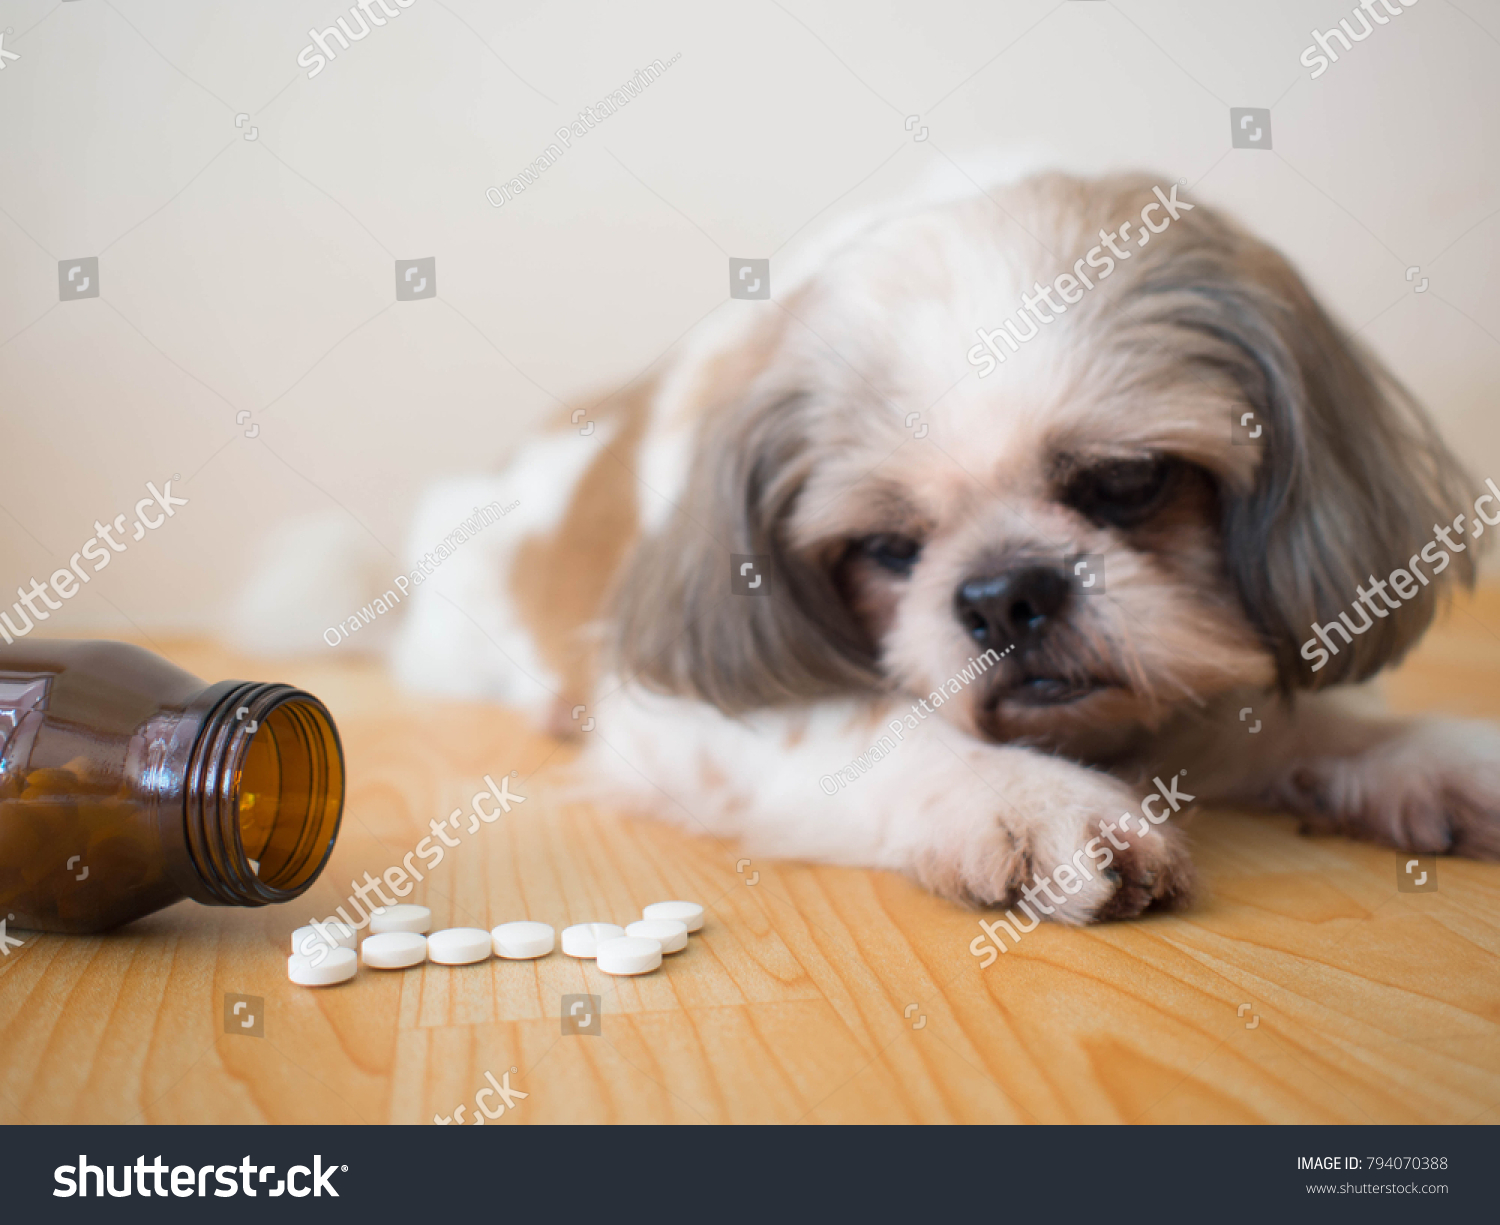 Sick dog - White medicine pills spilling out of bottle on wooden floor with blurred cute Shih tzu dog background. Pet health care, veterinary drugs and treatments concept. Selective focus. #794070388